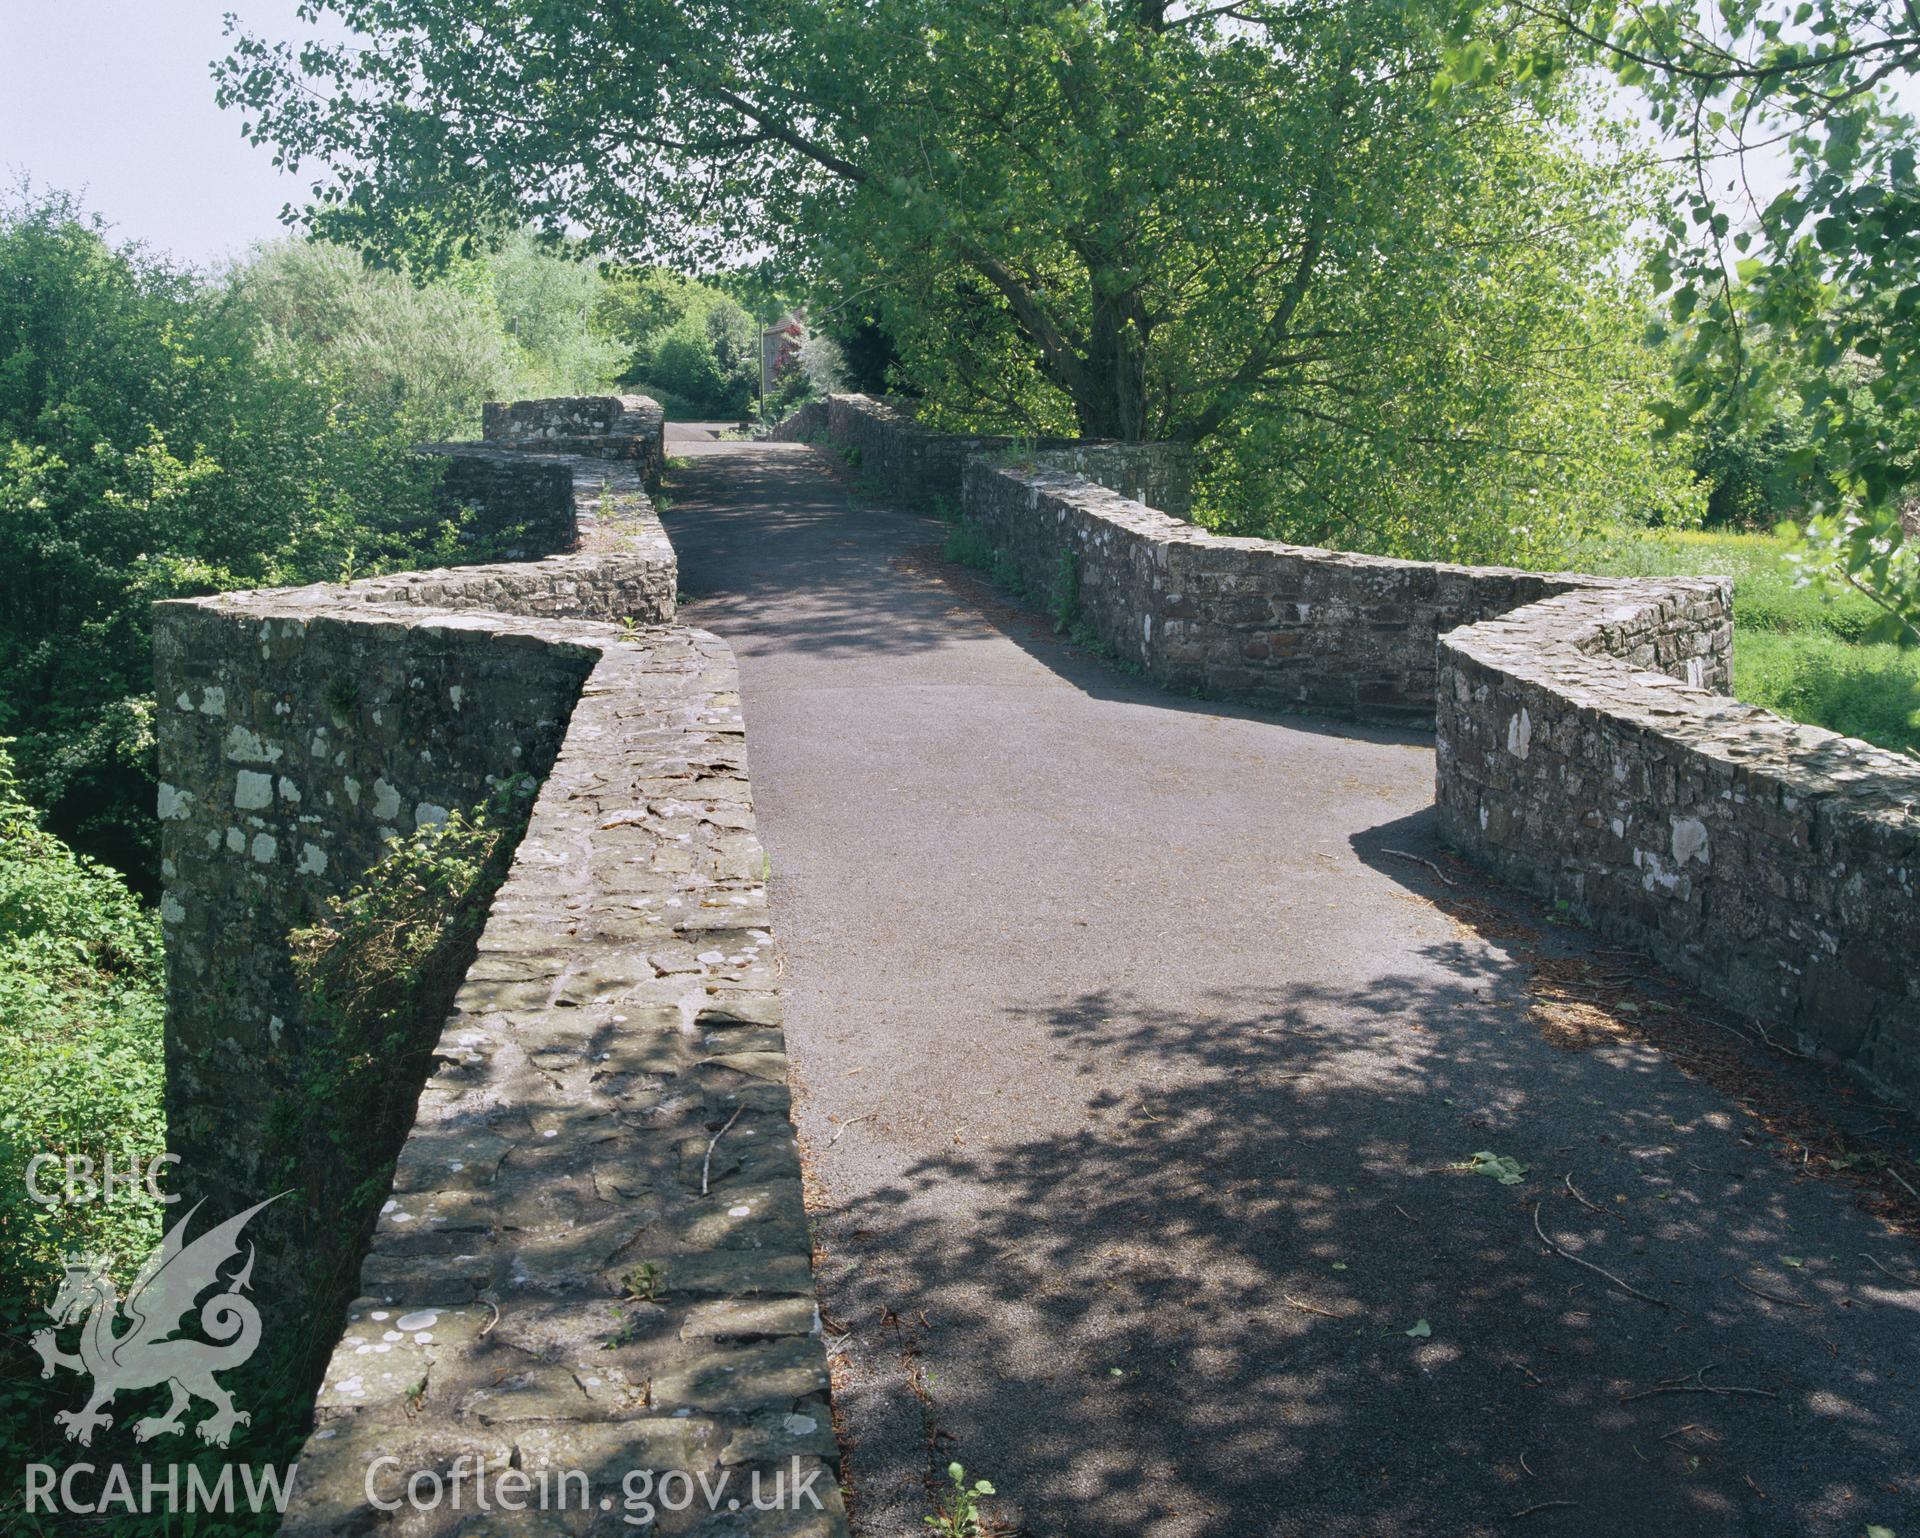 Colour transparency showing view of Pont Spwdwr, Trimsaran, produced by Iain Wright, June 2004.